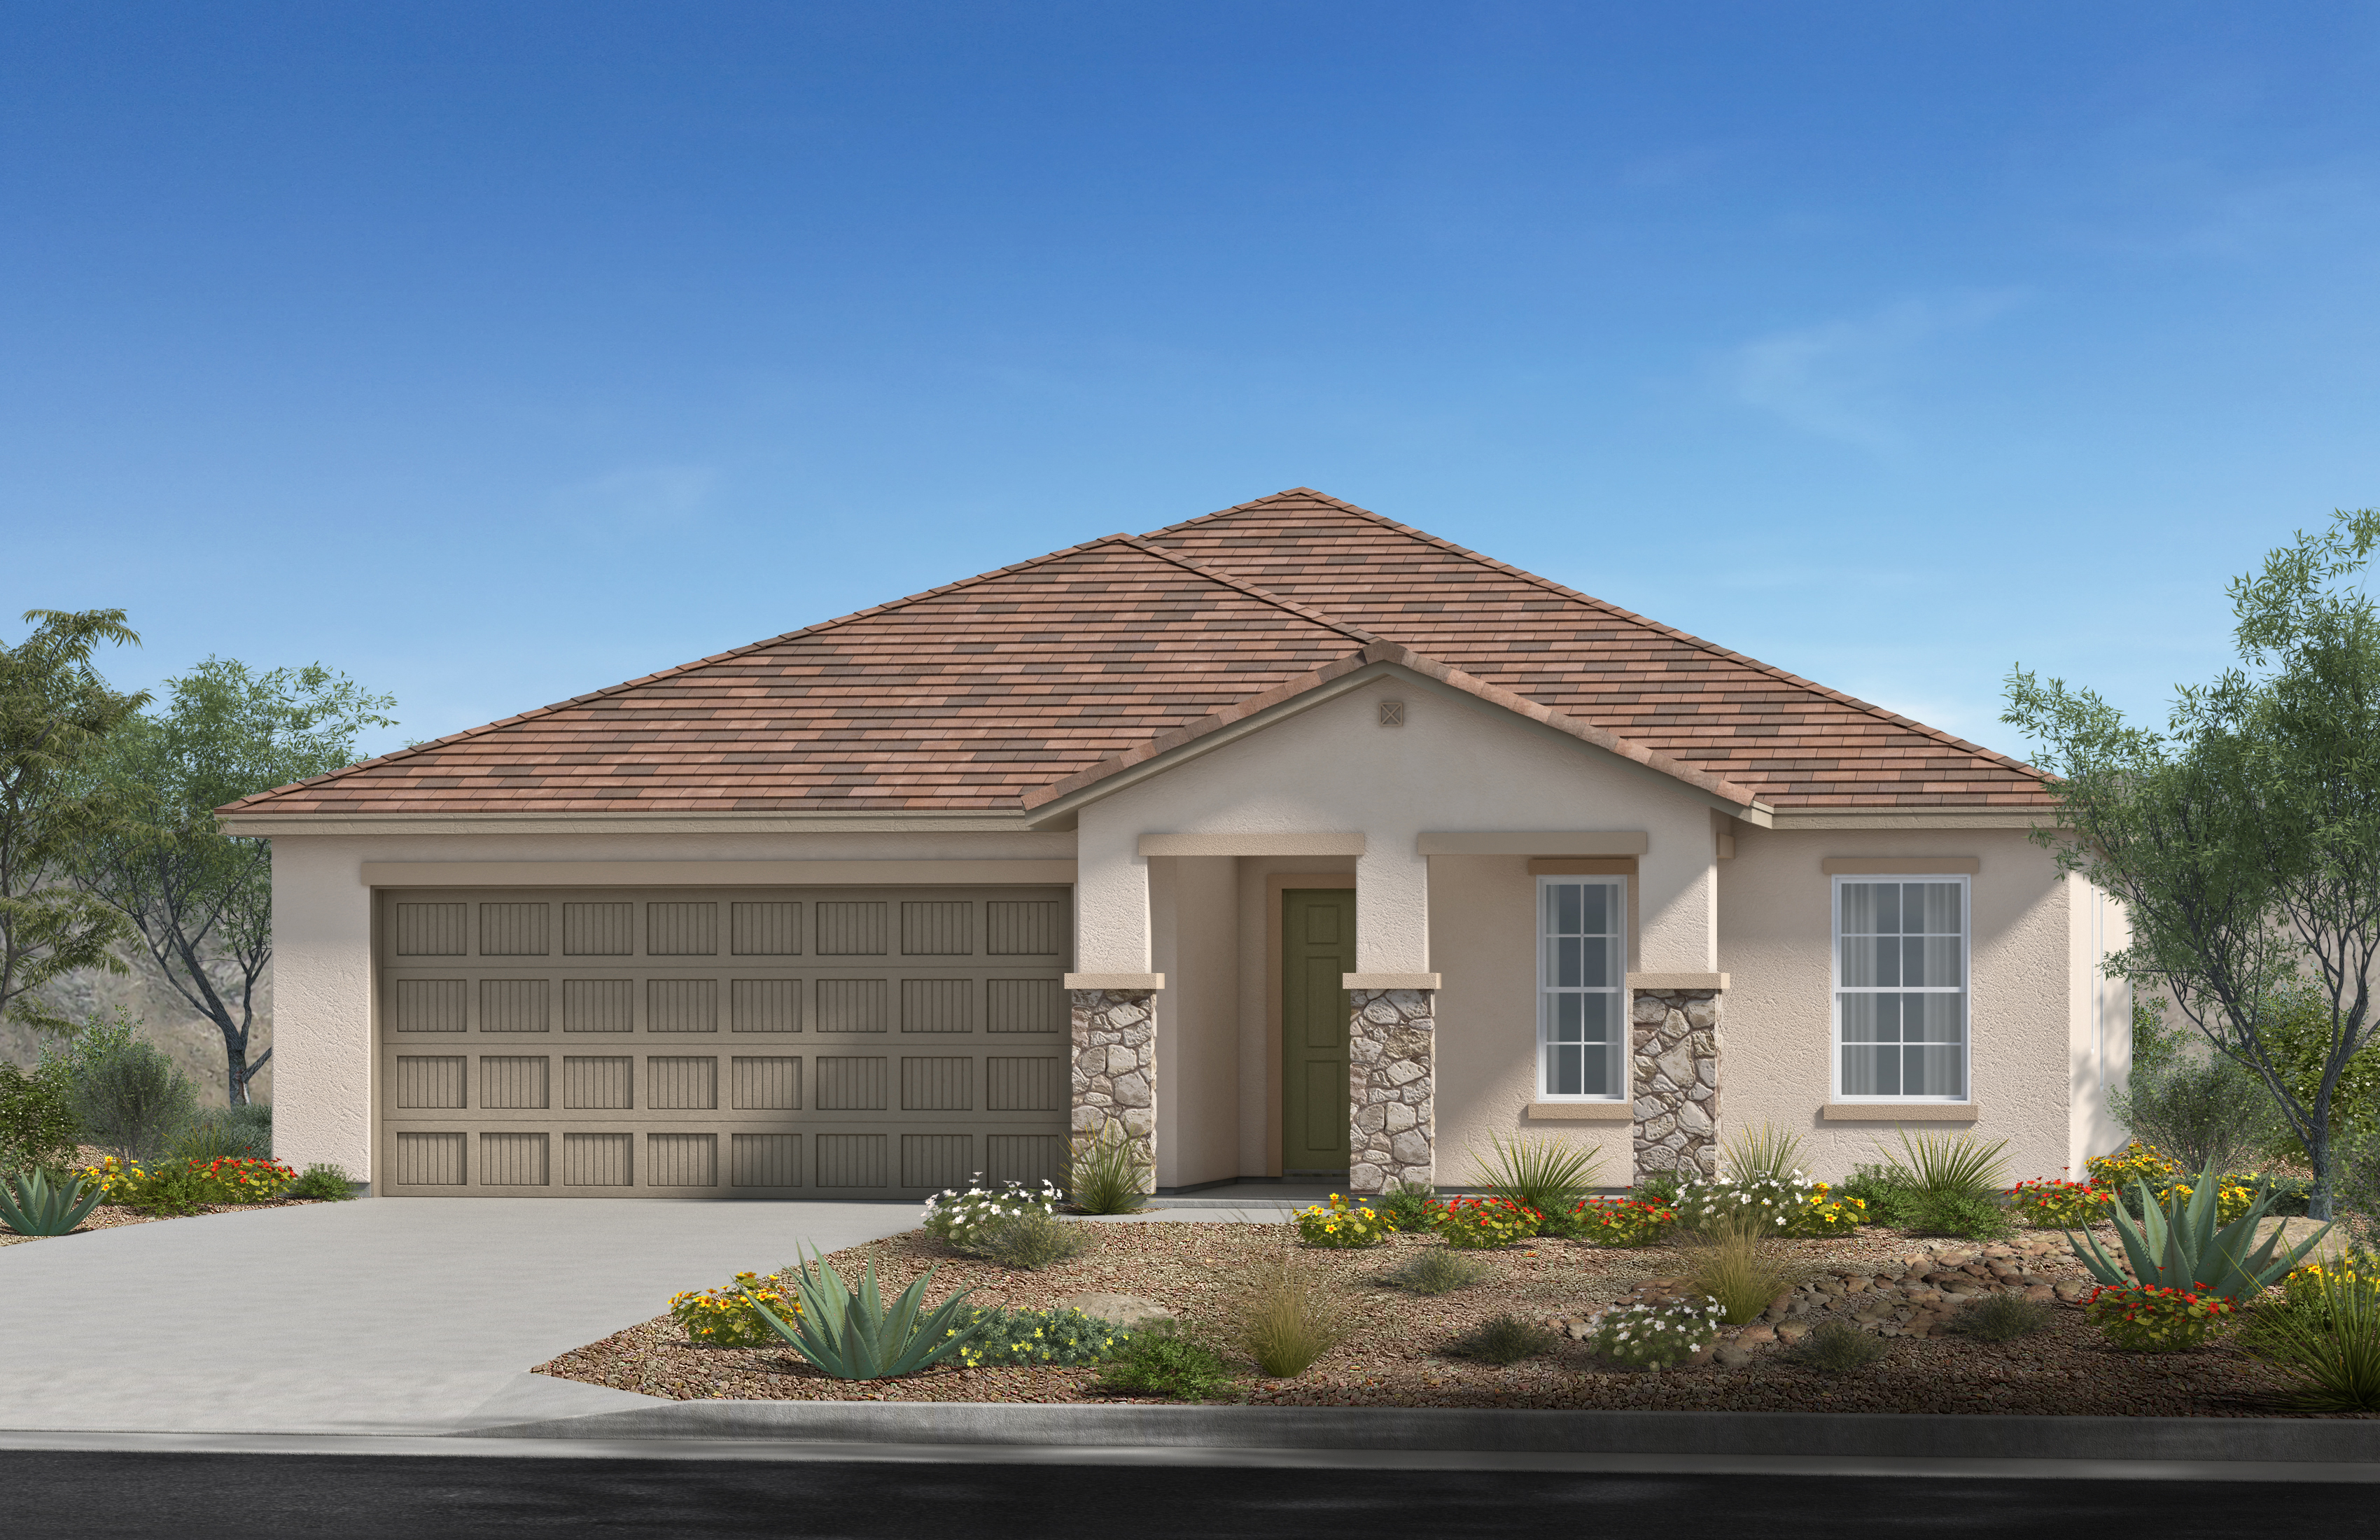 KB Home Announces the Grand Opening of Its Newest Community in the Highly  Desirable Rancho Sahuarita Master Plan | Business Wire